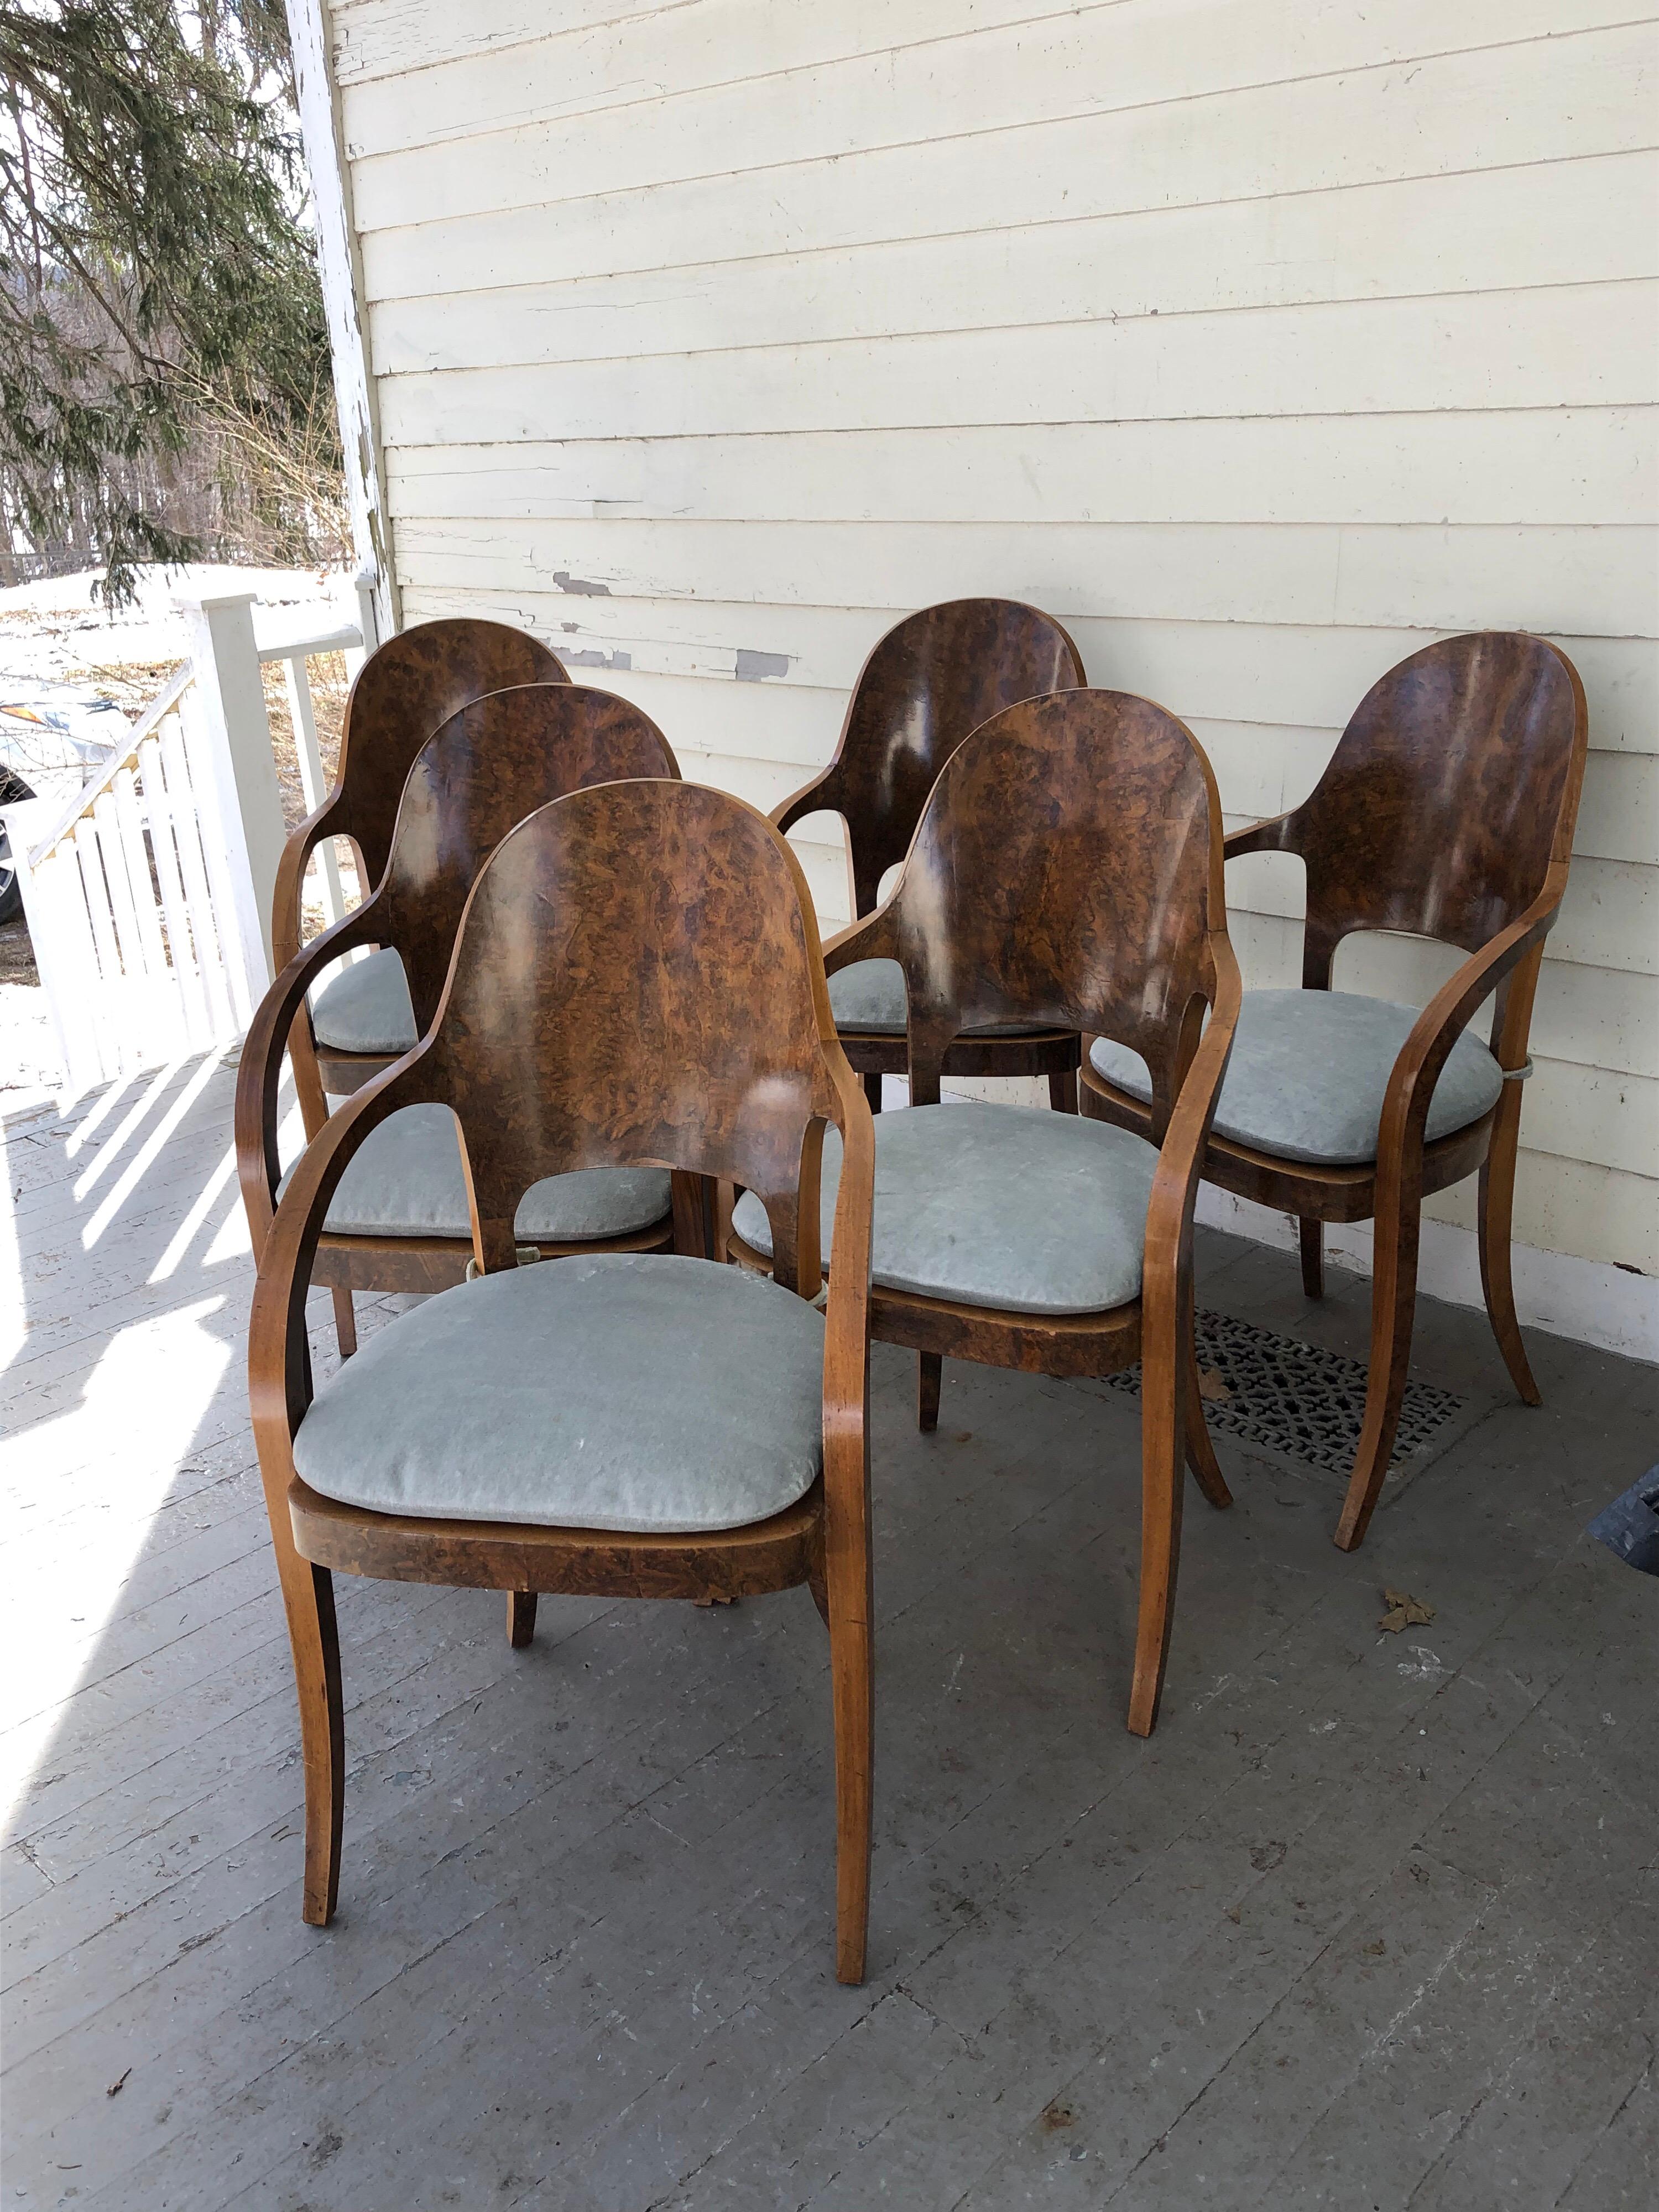 Set of six Austrian or Italian walnut dining room armchairs with tie-on loose
seat cushions- upholstery blue/grey velvet, with velcro fasteners. Wonderful curved back and elegant sabre legs. Probably from the 1940s. From the Estate of Jan Cowles.